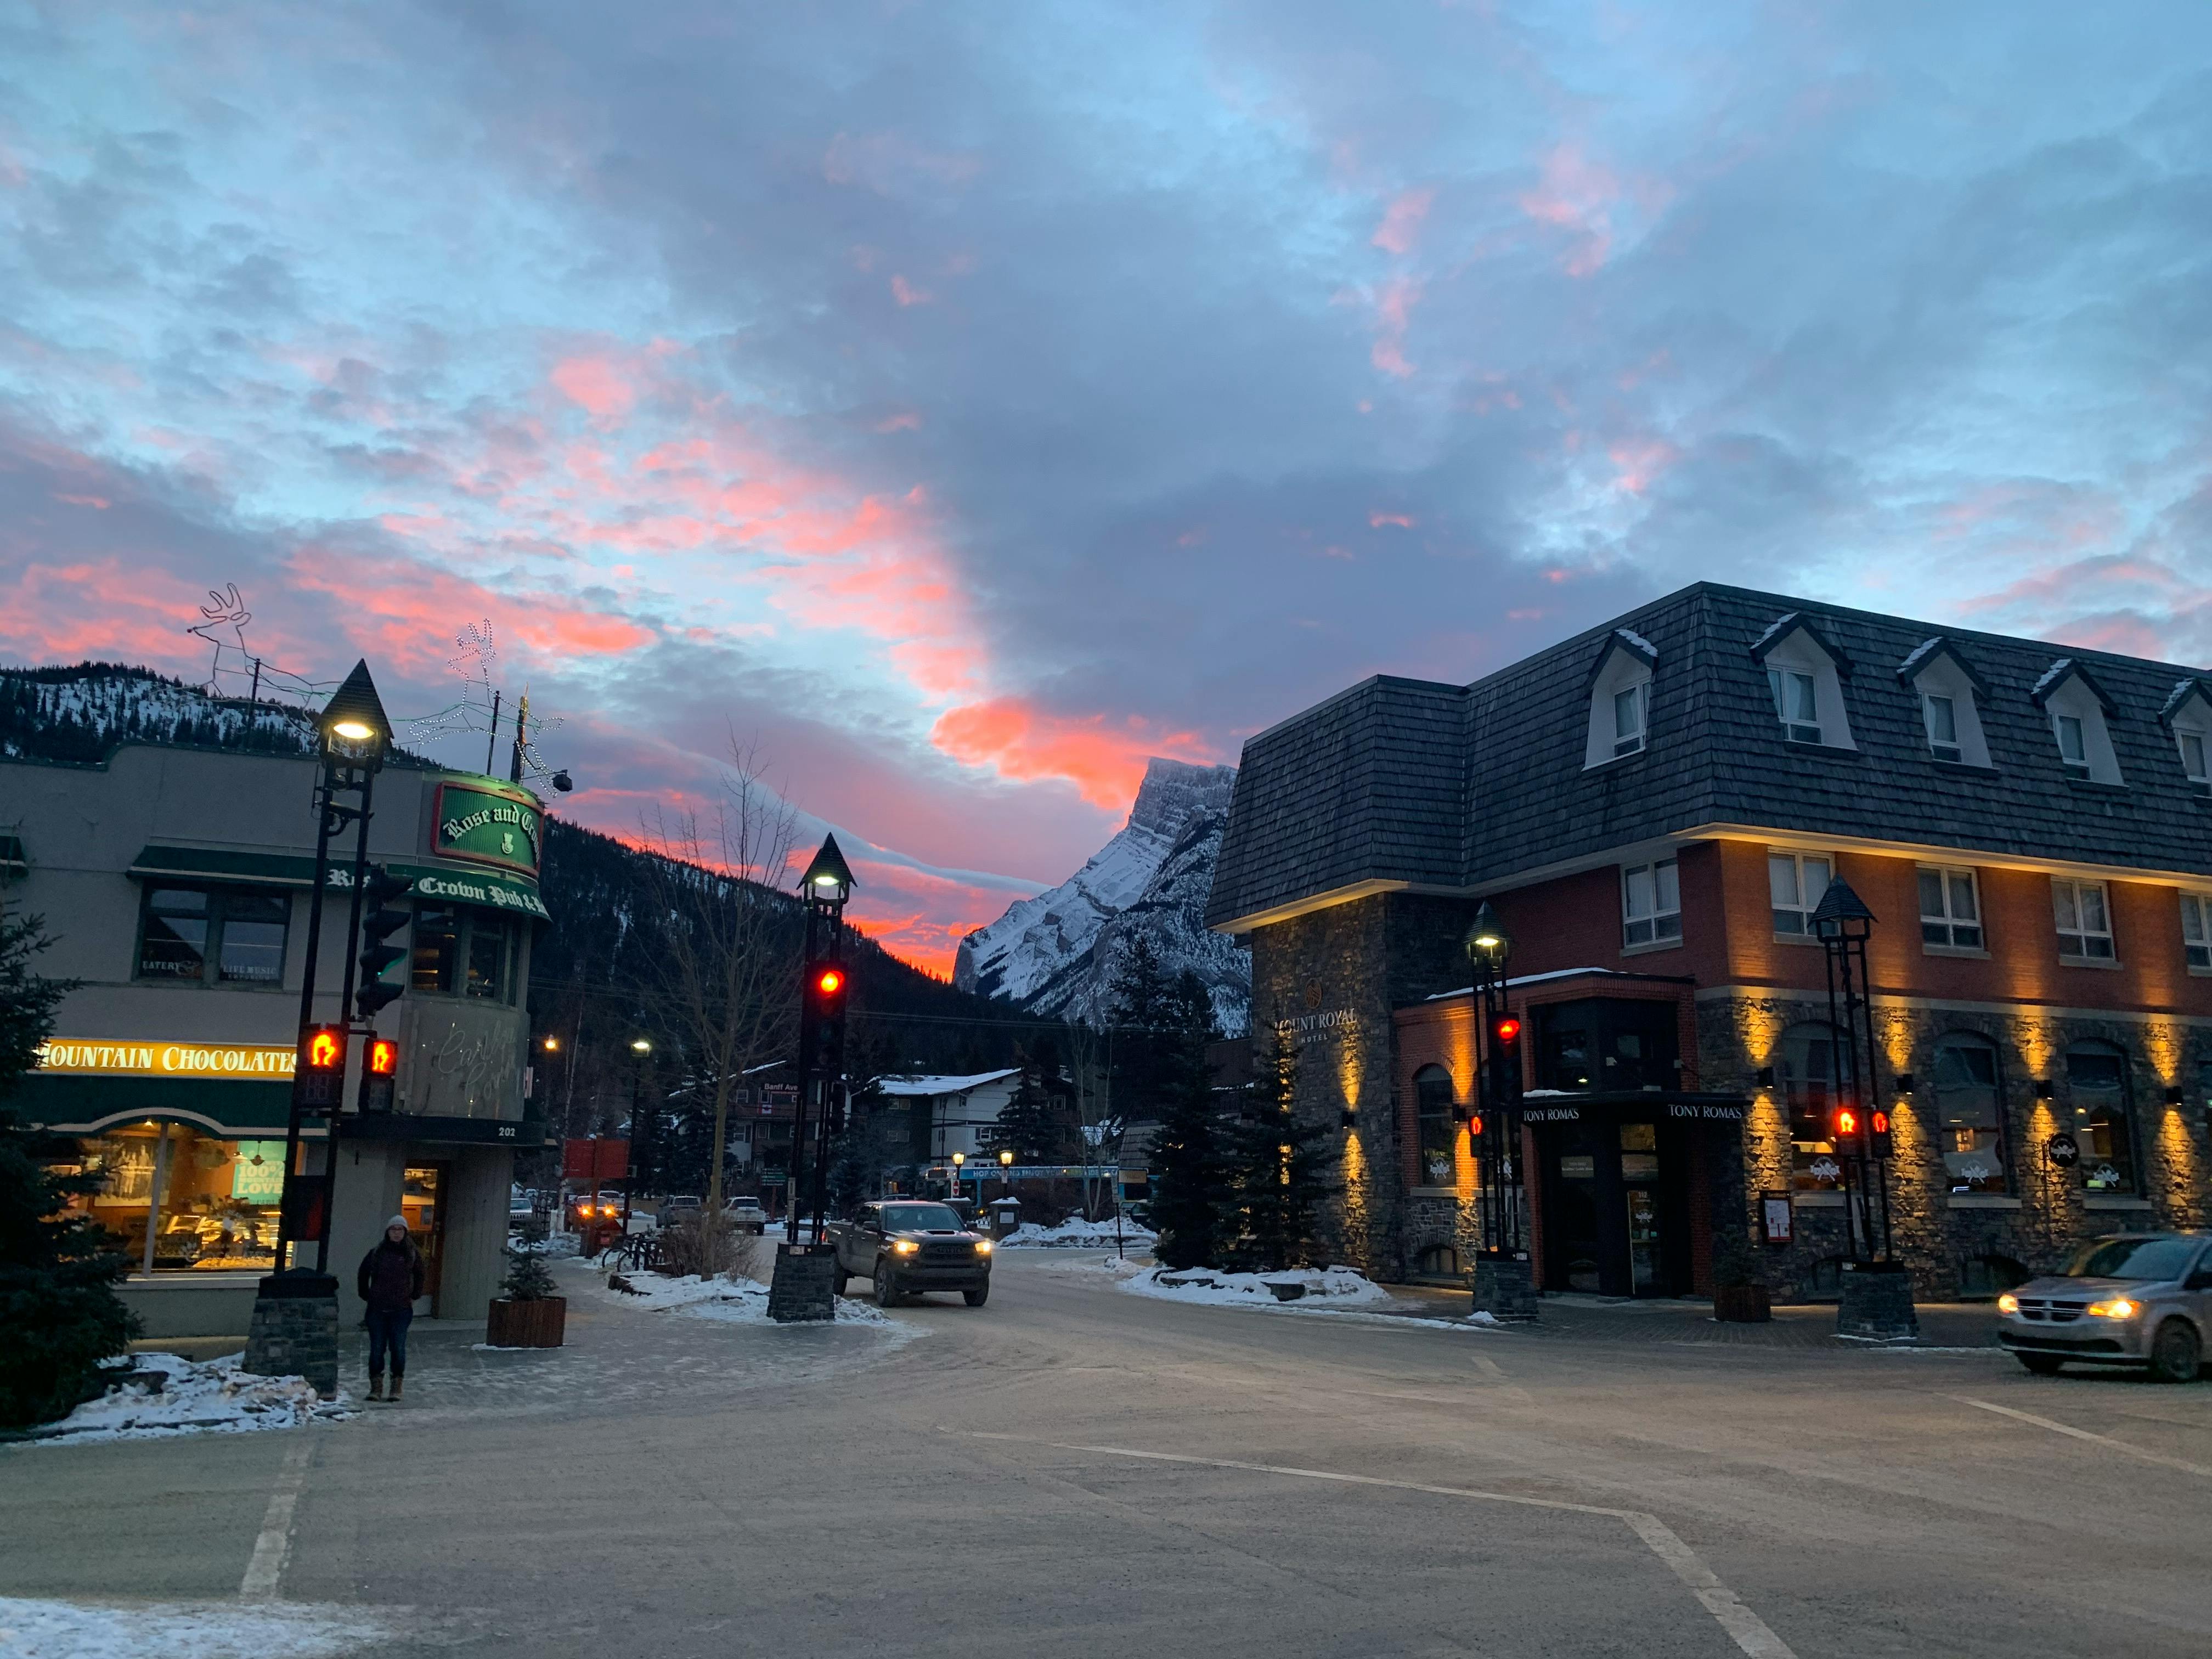 An image taken on a street corner in Downtown Banff. In the background, a jagged, snow-covered peak rises about the town, and the sky glows pink and blue in the cloudy sunset.